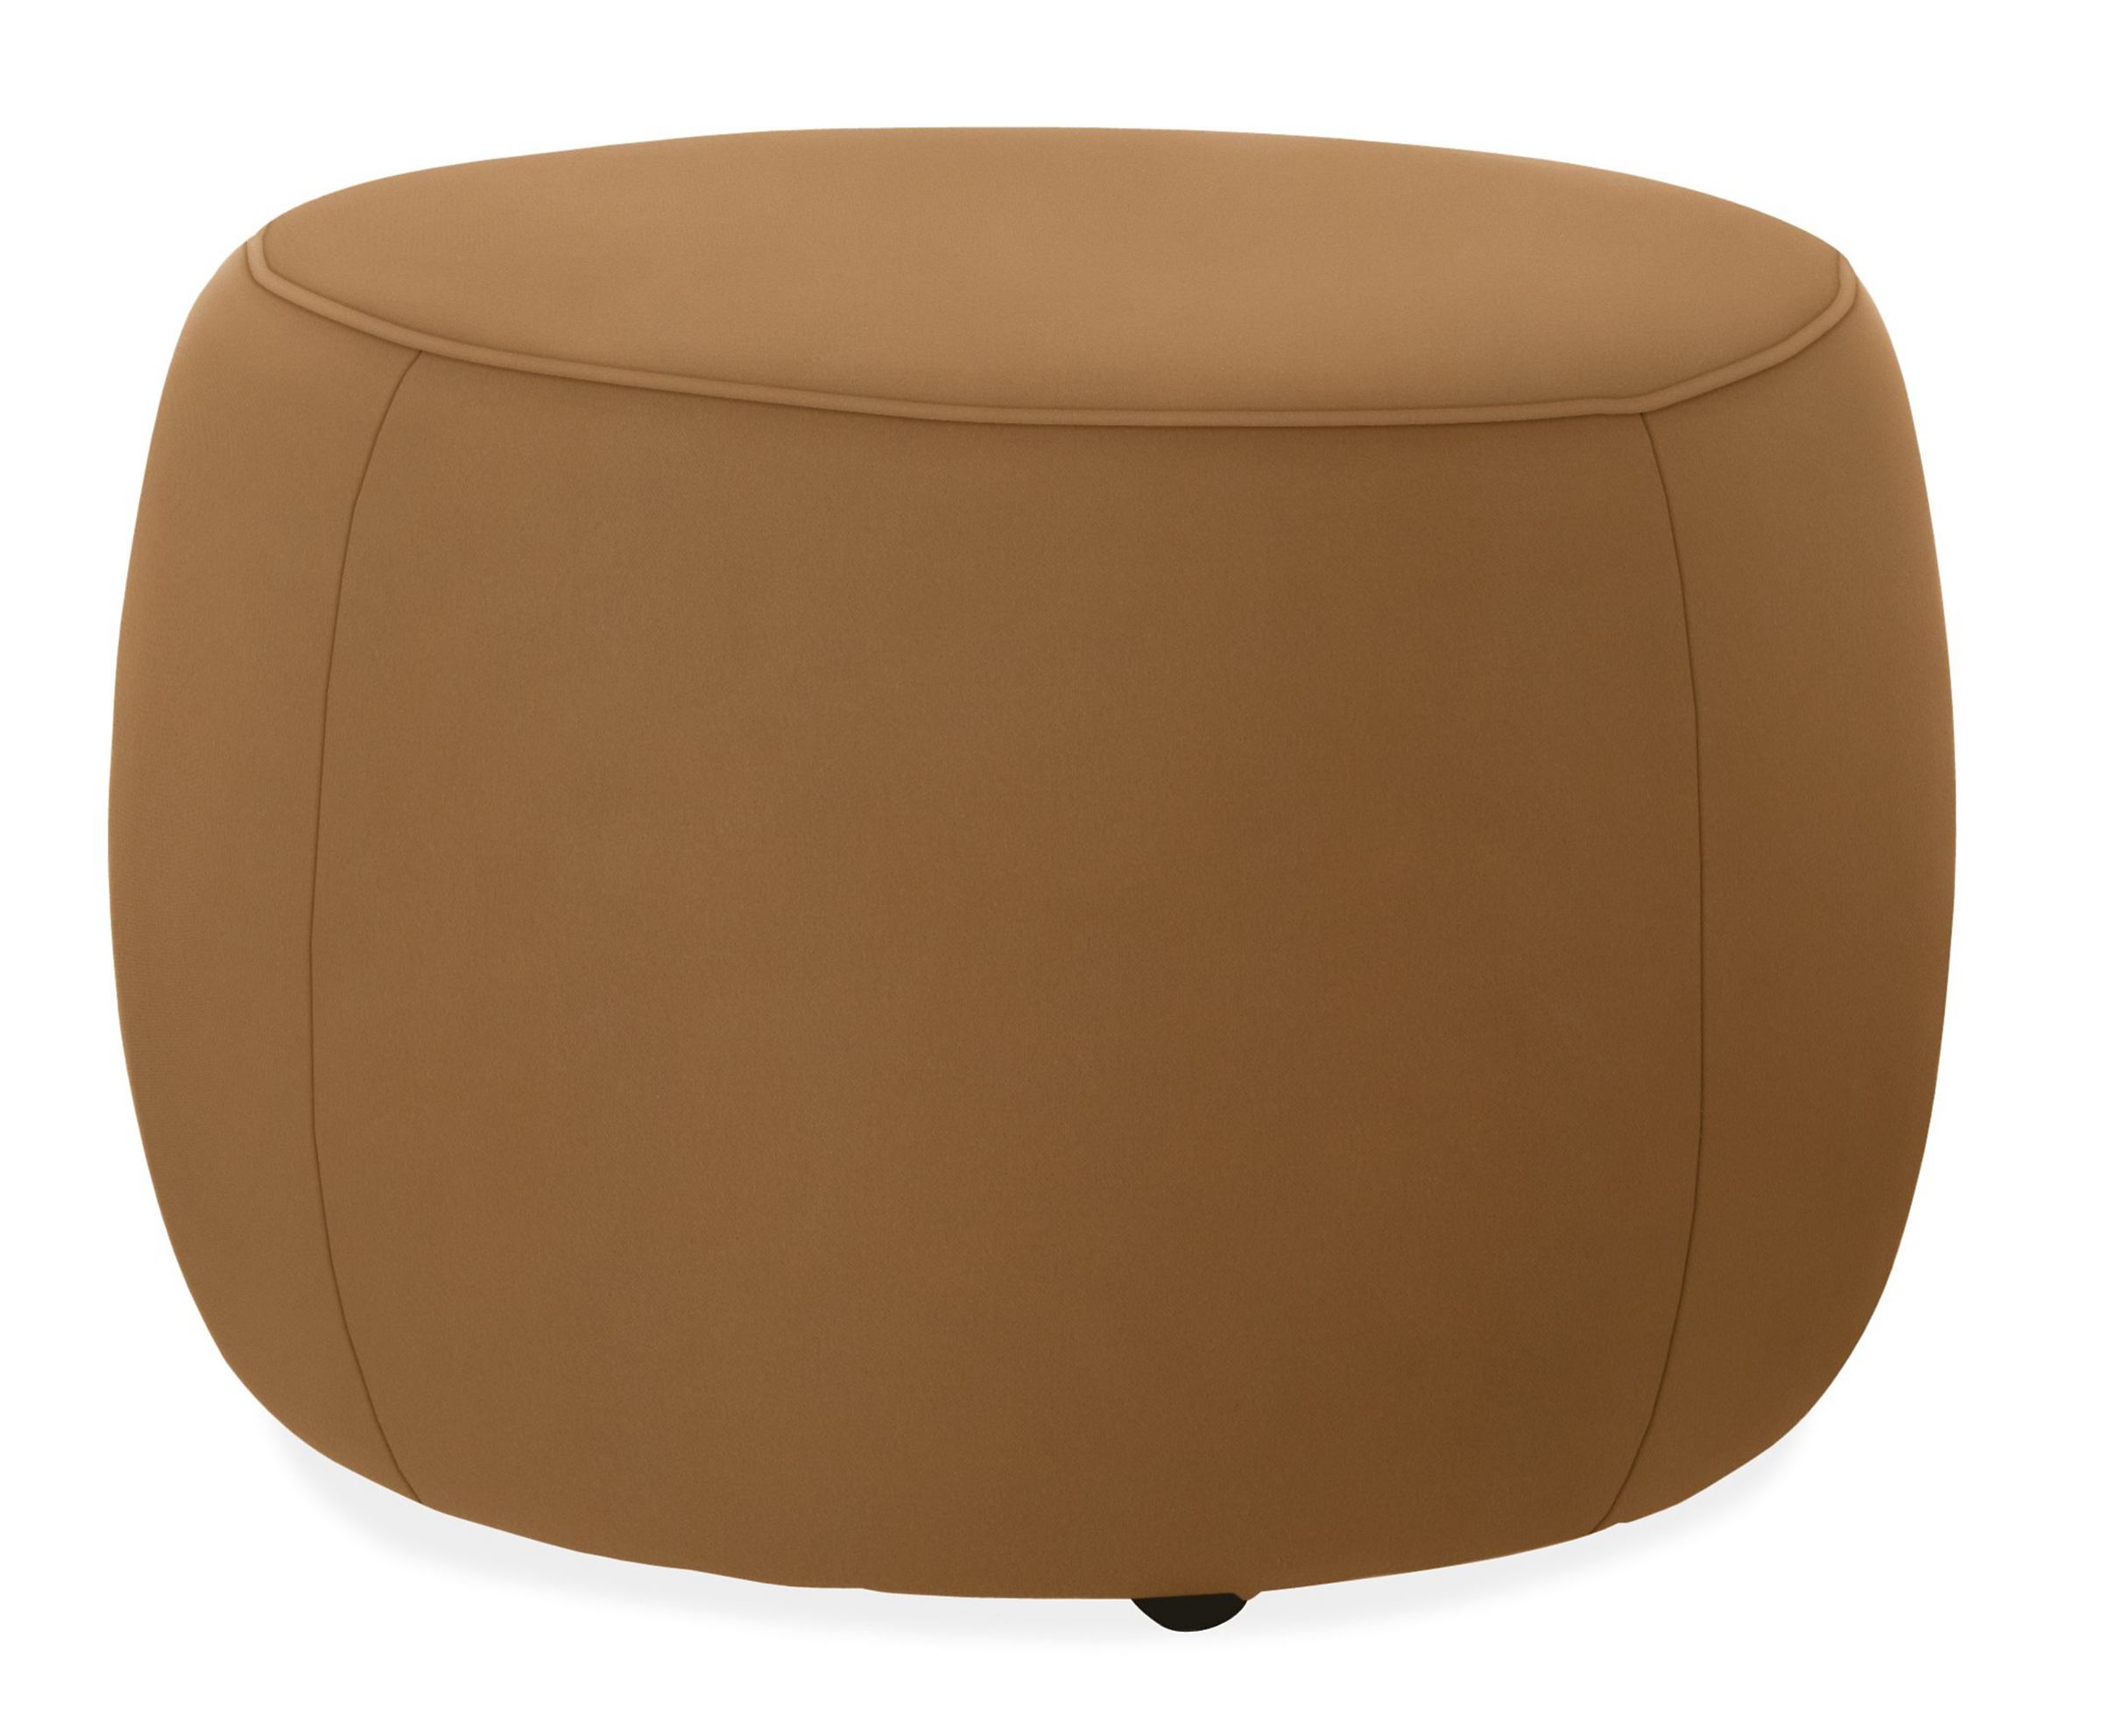 Lind 20 diam 16h Ottoman in Banks Camel